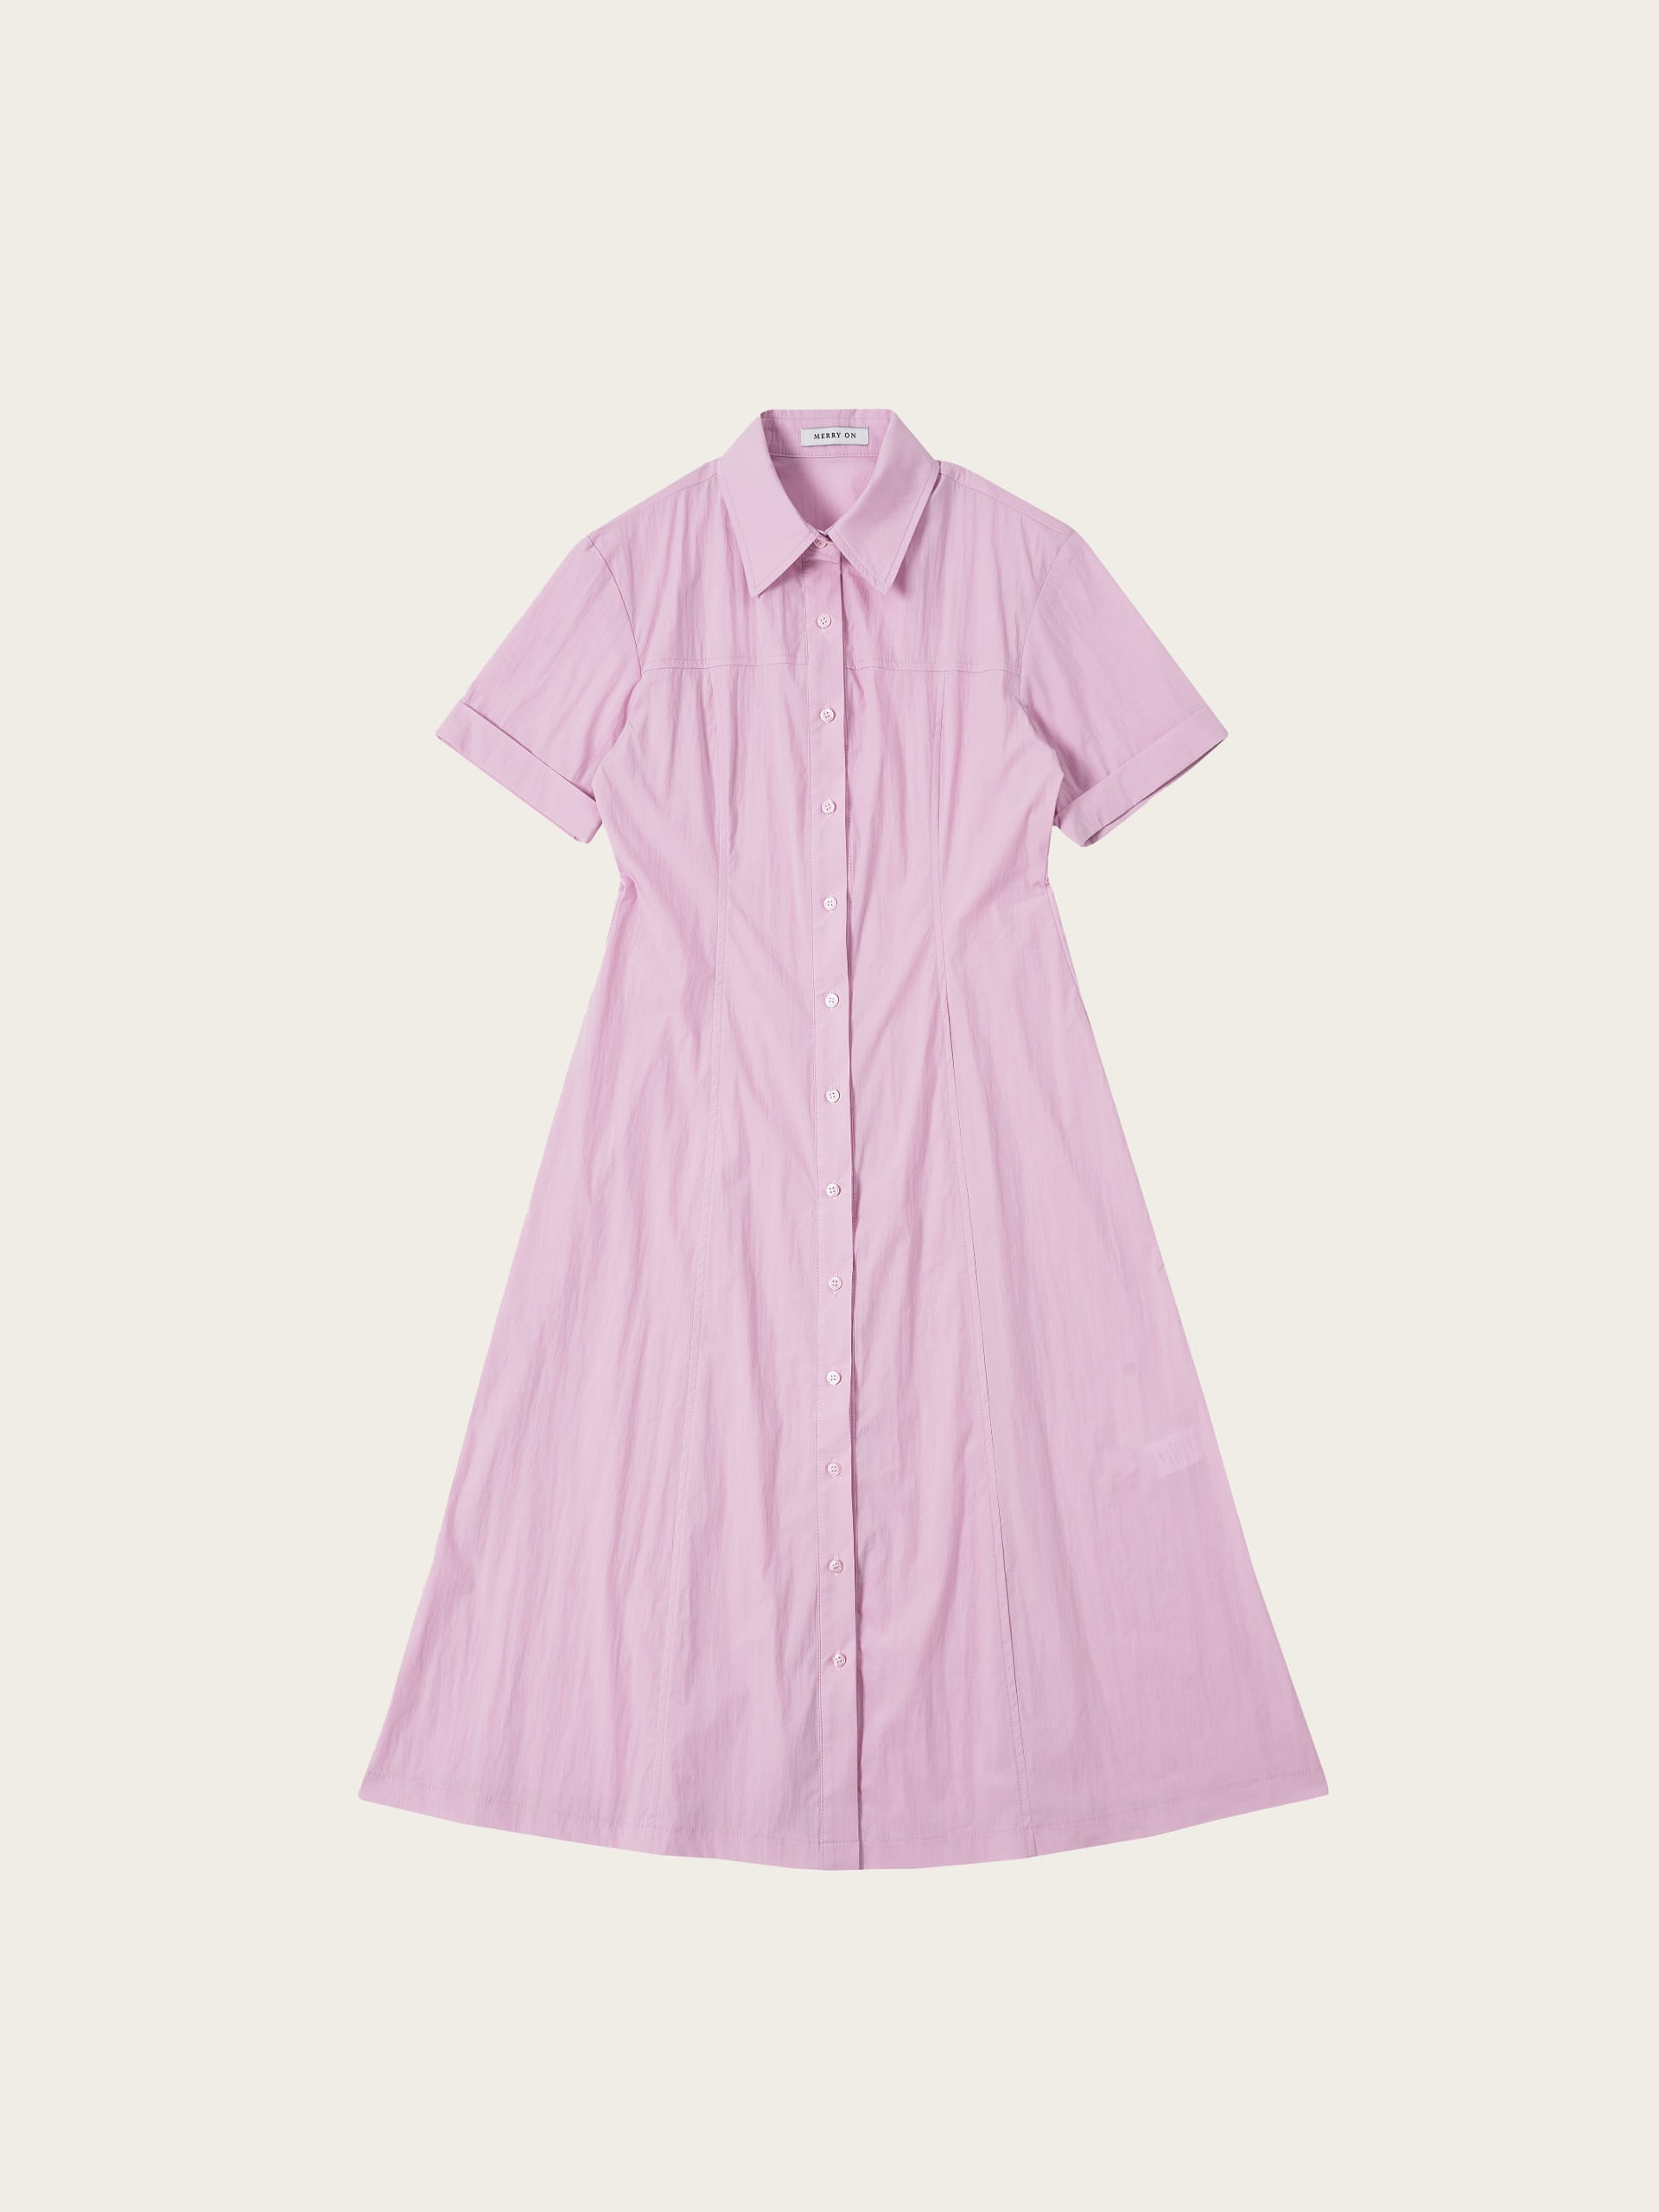 Frisia Shirt Dress *05.08 Reservation for delivery